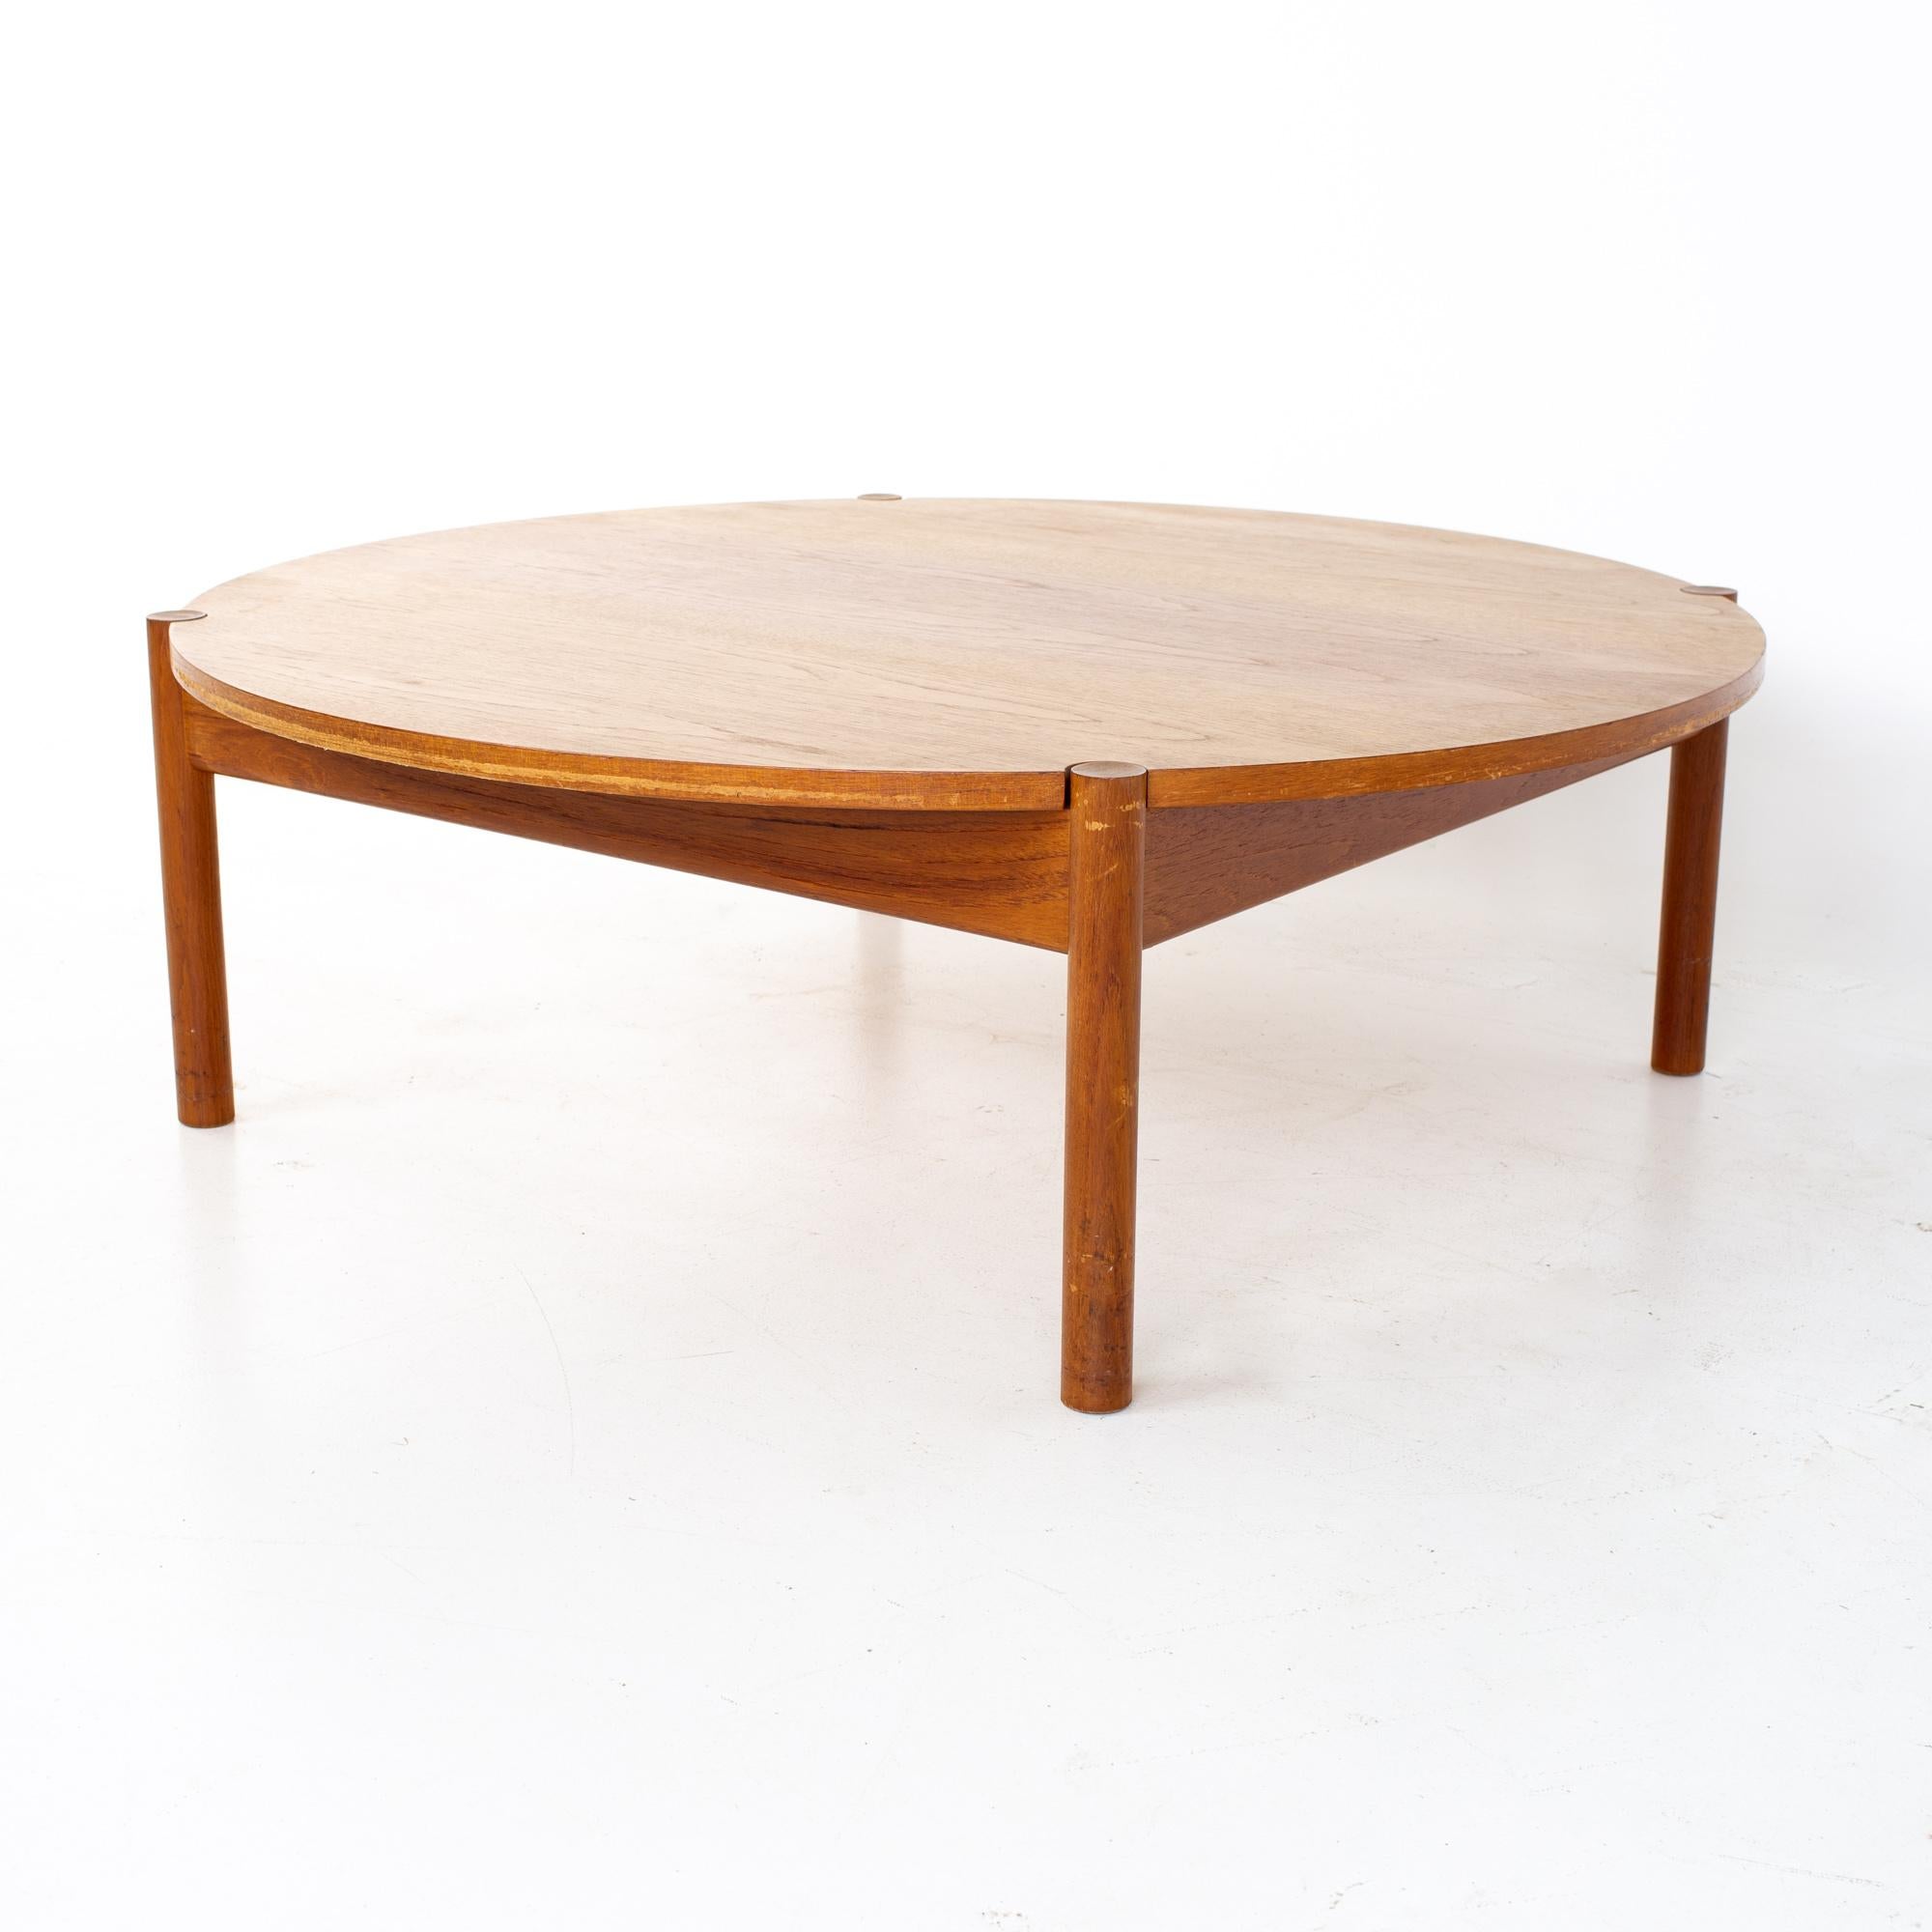 Mid century round Danish coffee table
Table measures: 45.25 wide x 45.25 deep x 15 inches high

All pieces of furniture can be had in what we call restored vintage condition. That means the piece is restored upon purchase so it’s free of